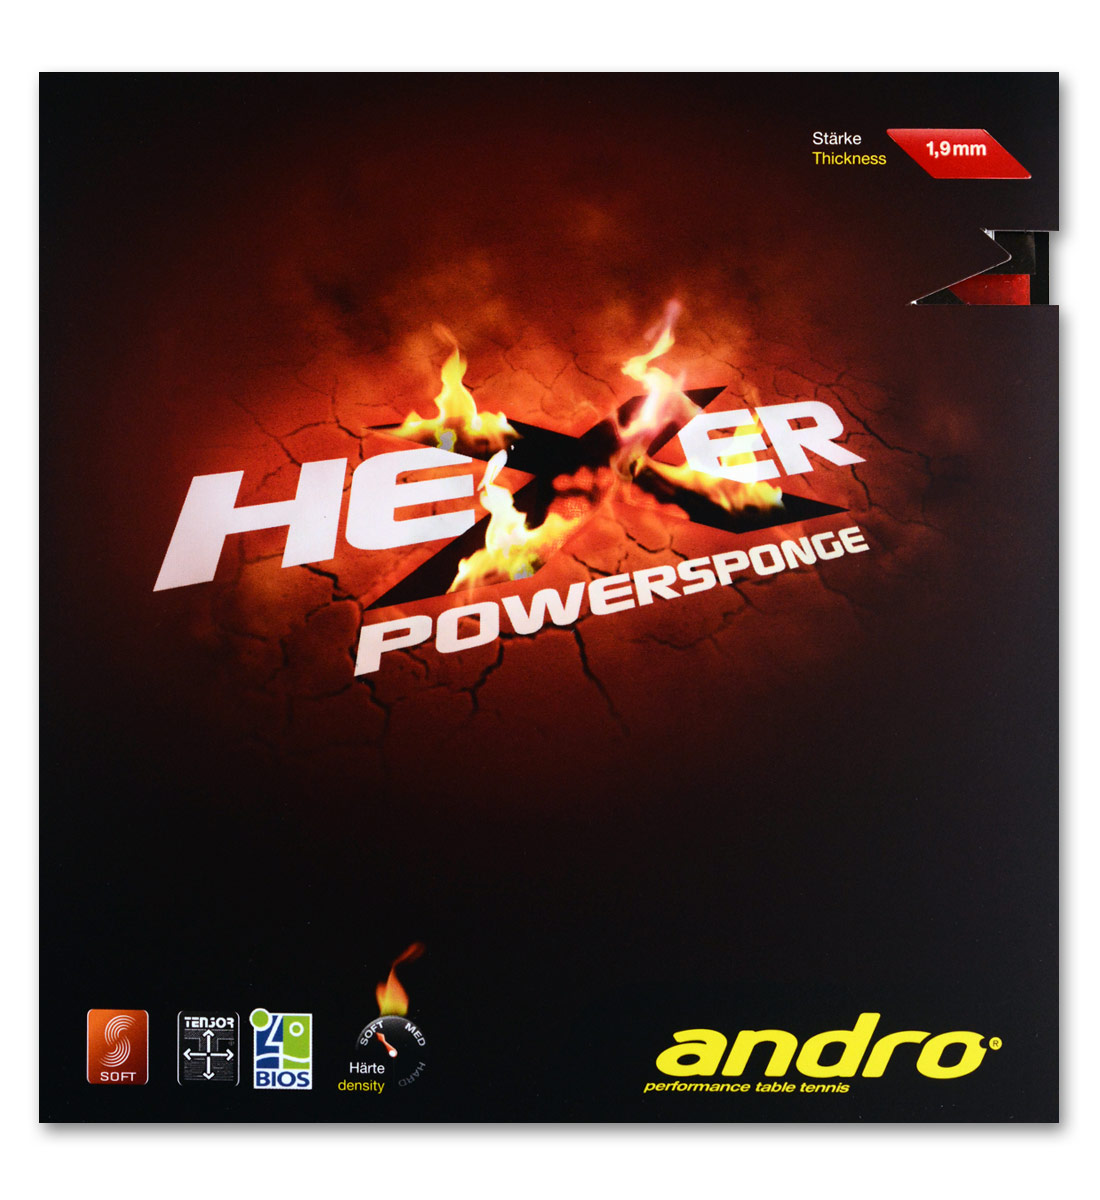 Andro Hexer Powersponge Questions & Answers